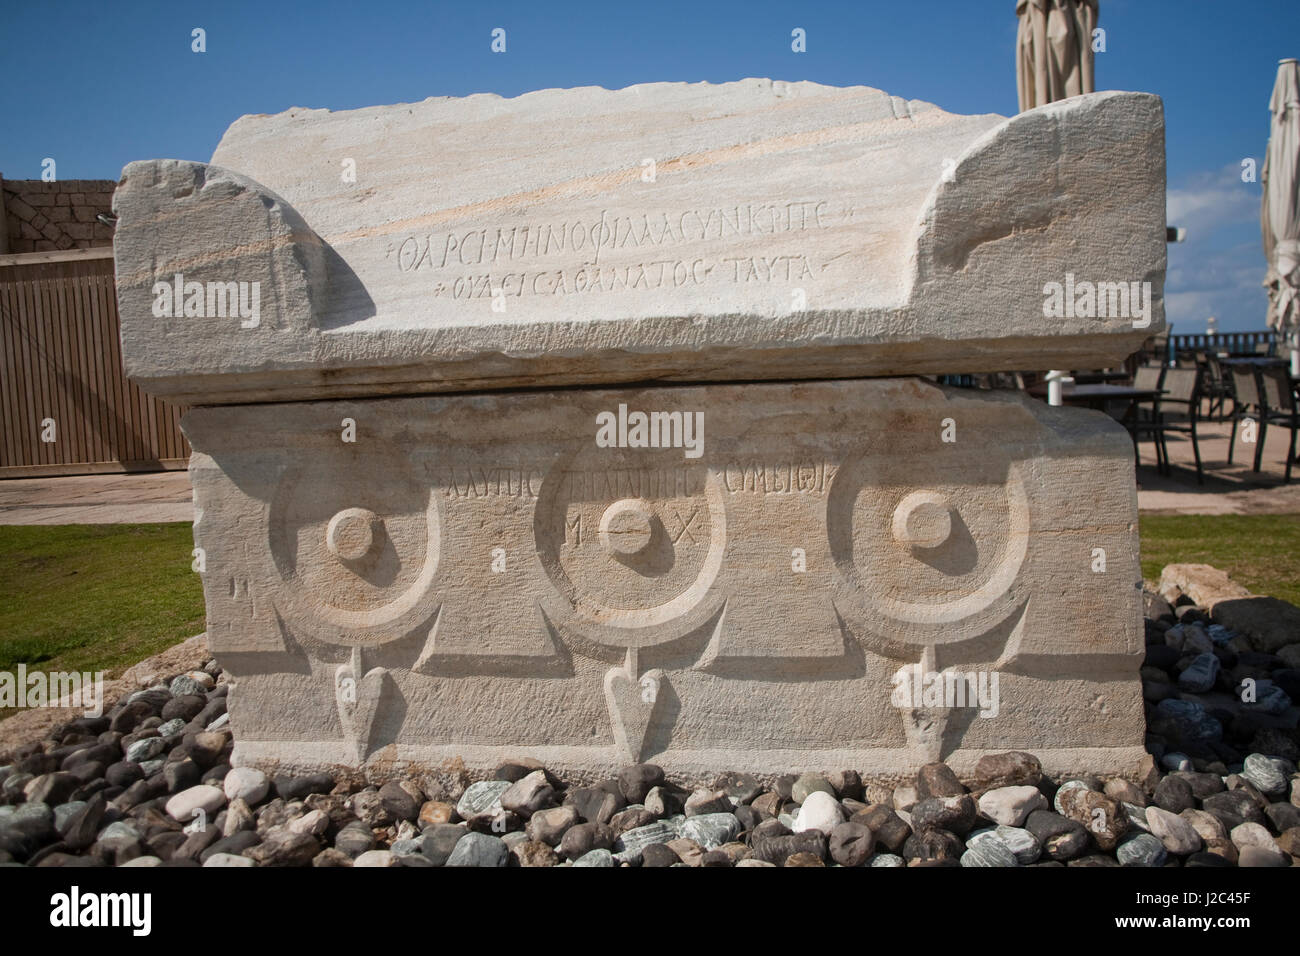 Ancient inscribed sarcophagus adorned with garlands on shoreline of Caesarea, Israel. Stock Photo